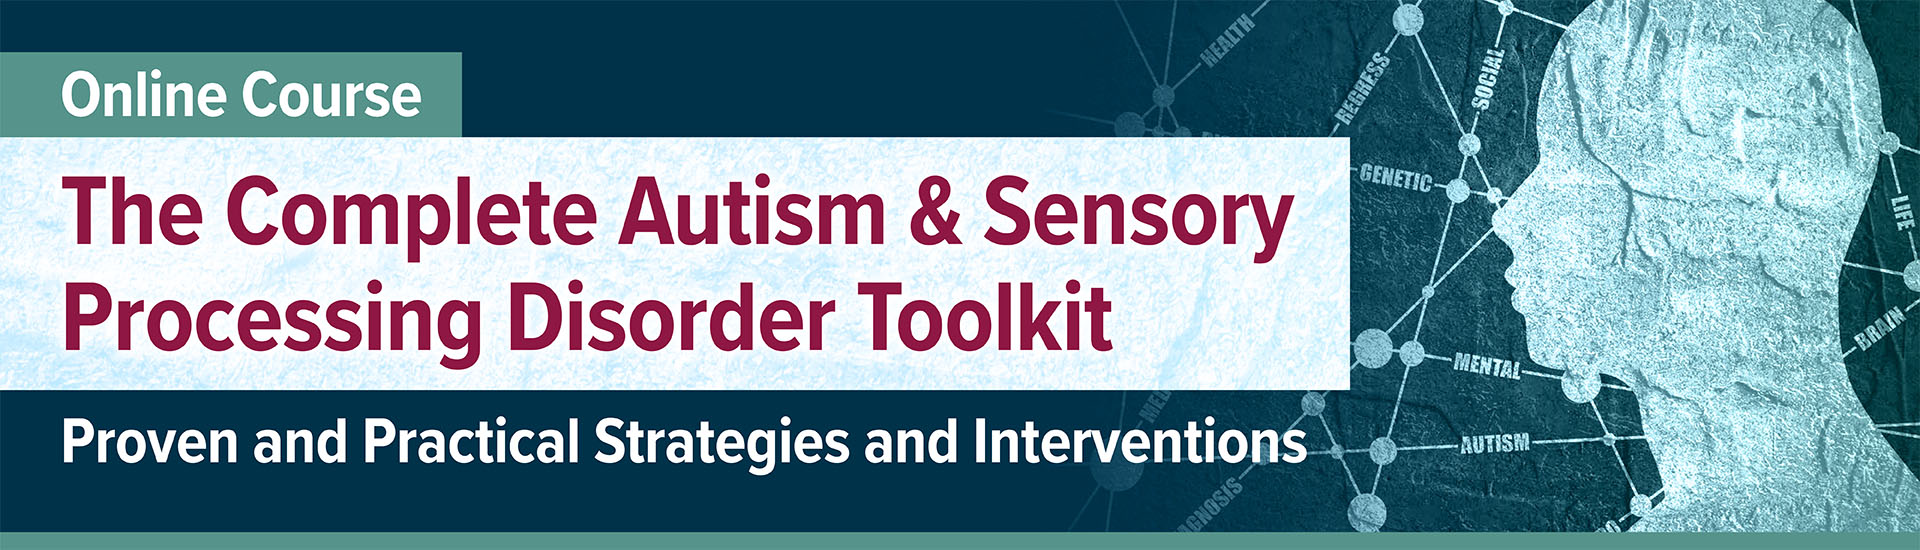 Online Course: The Complete Autism & Sensory Processing Disorder Toolkit